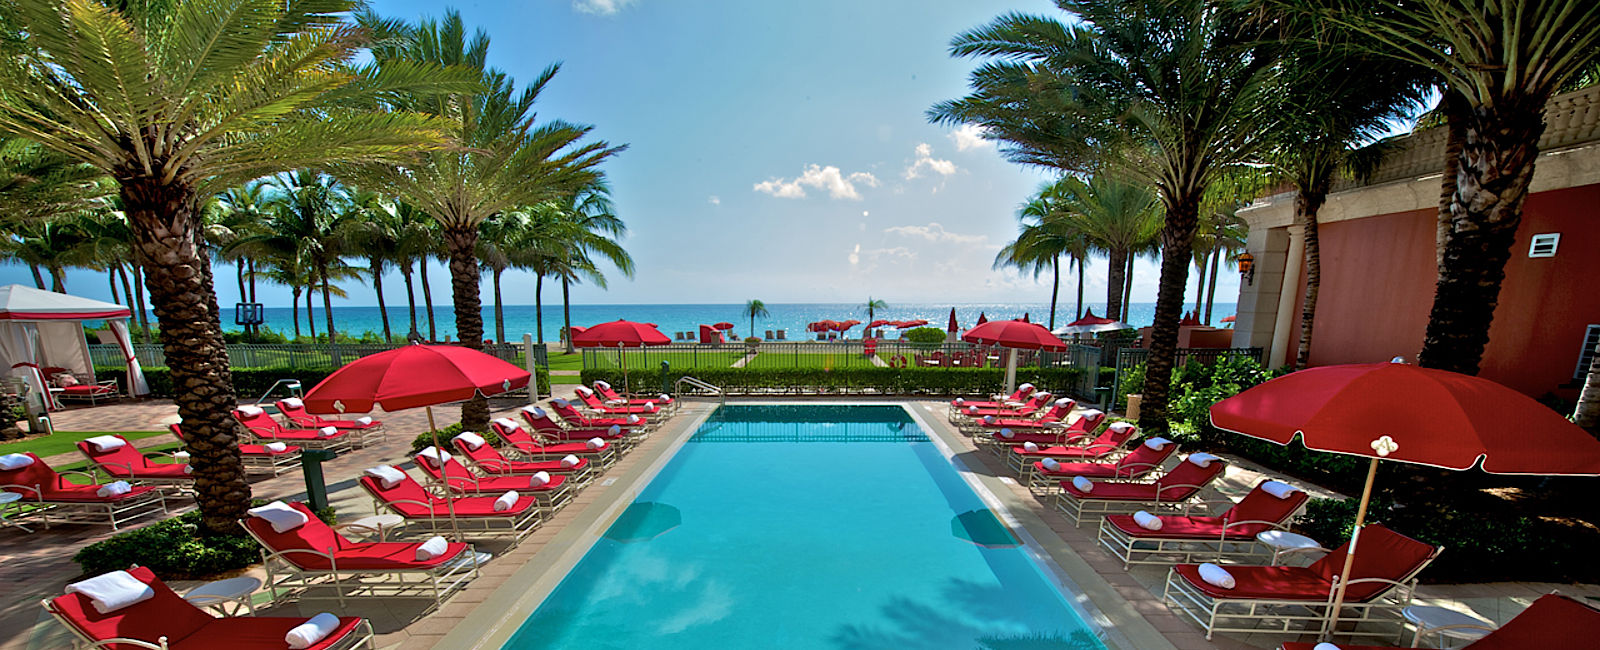 HOTELTEST
 Acqualina Resort & Spa On The Beach 
 Toller Turm 